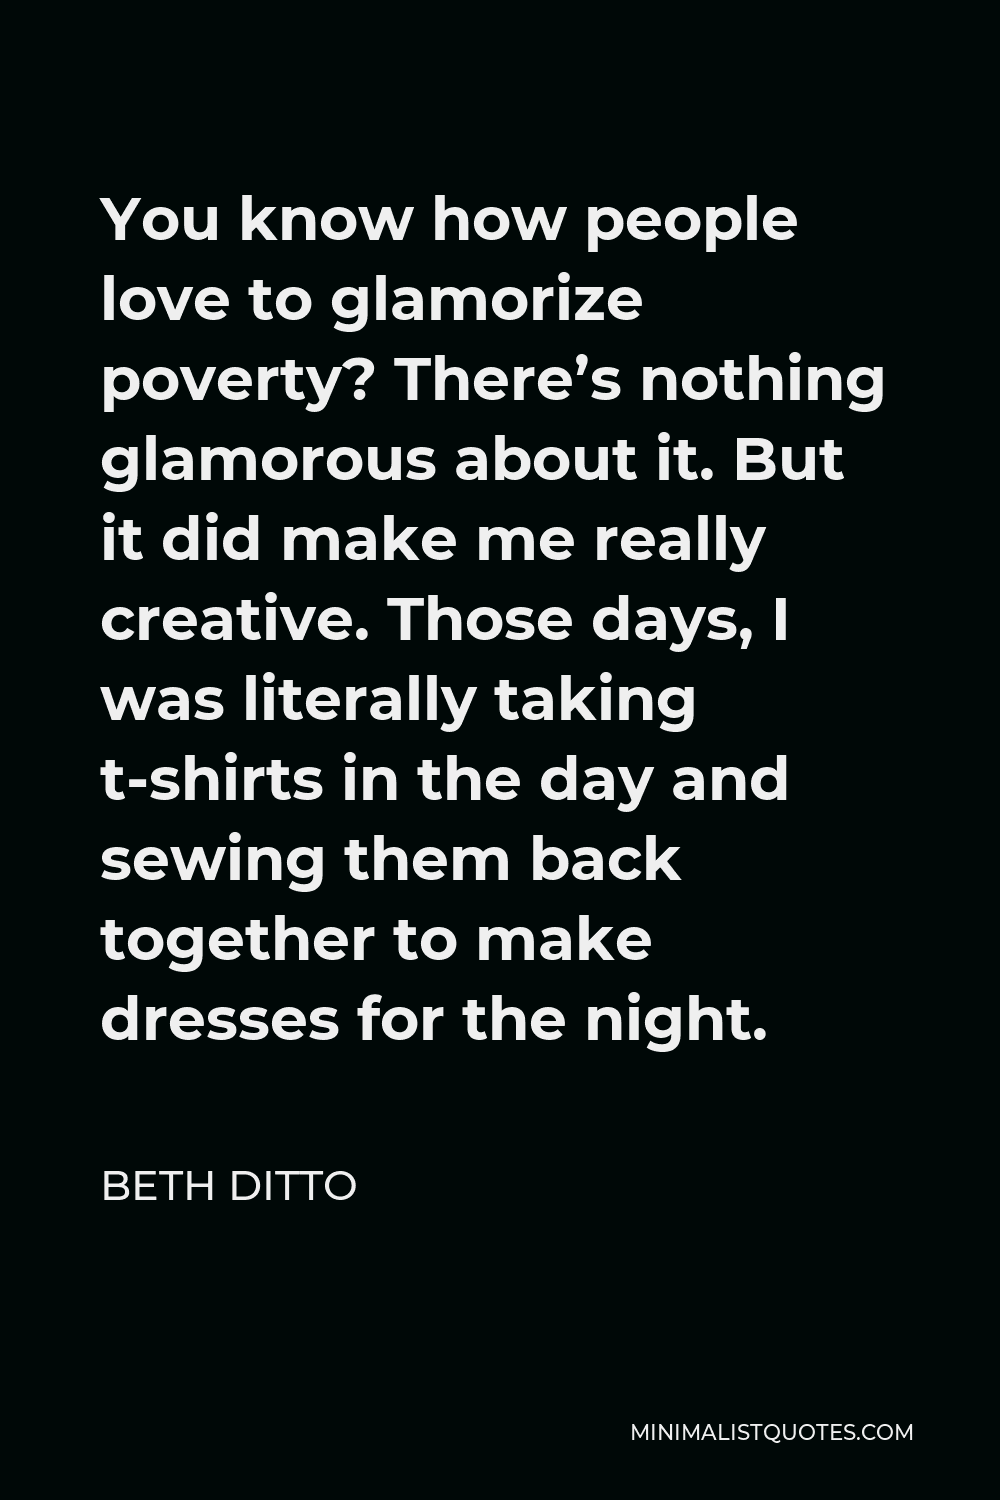 Beth Ditto Quote - You know how people love to glamorize poverty? There’s nothing glamorous about it. But it did make me really creative. Those days, I was literally taking t-shirts in the day and sewing them back together to make dresses for the night.